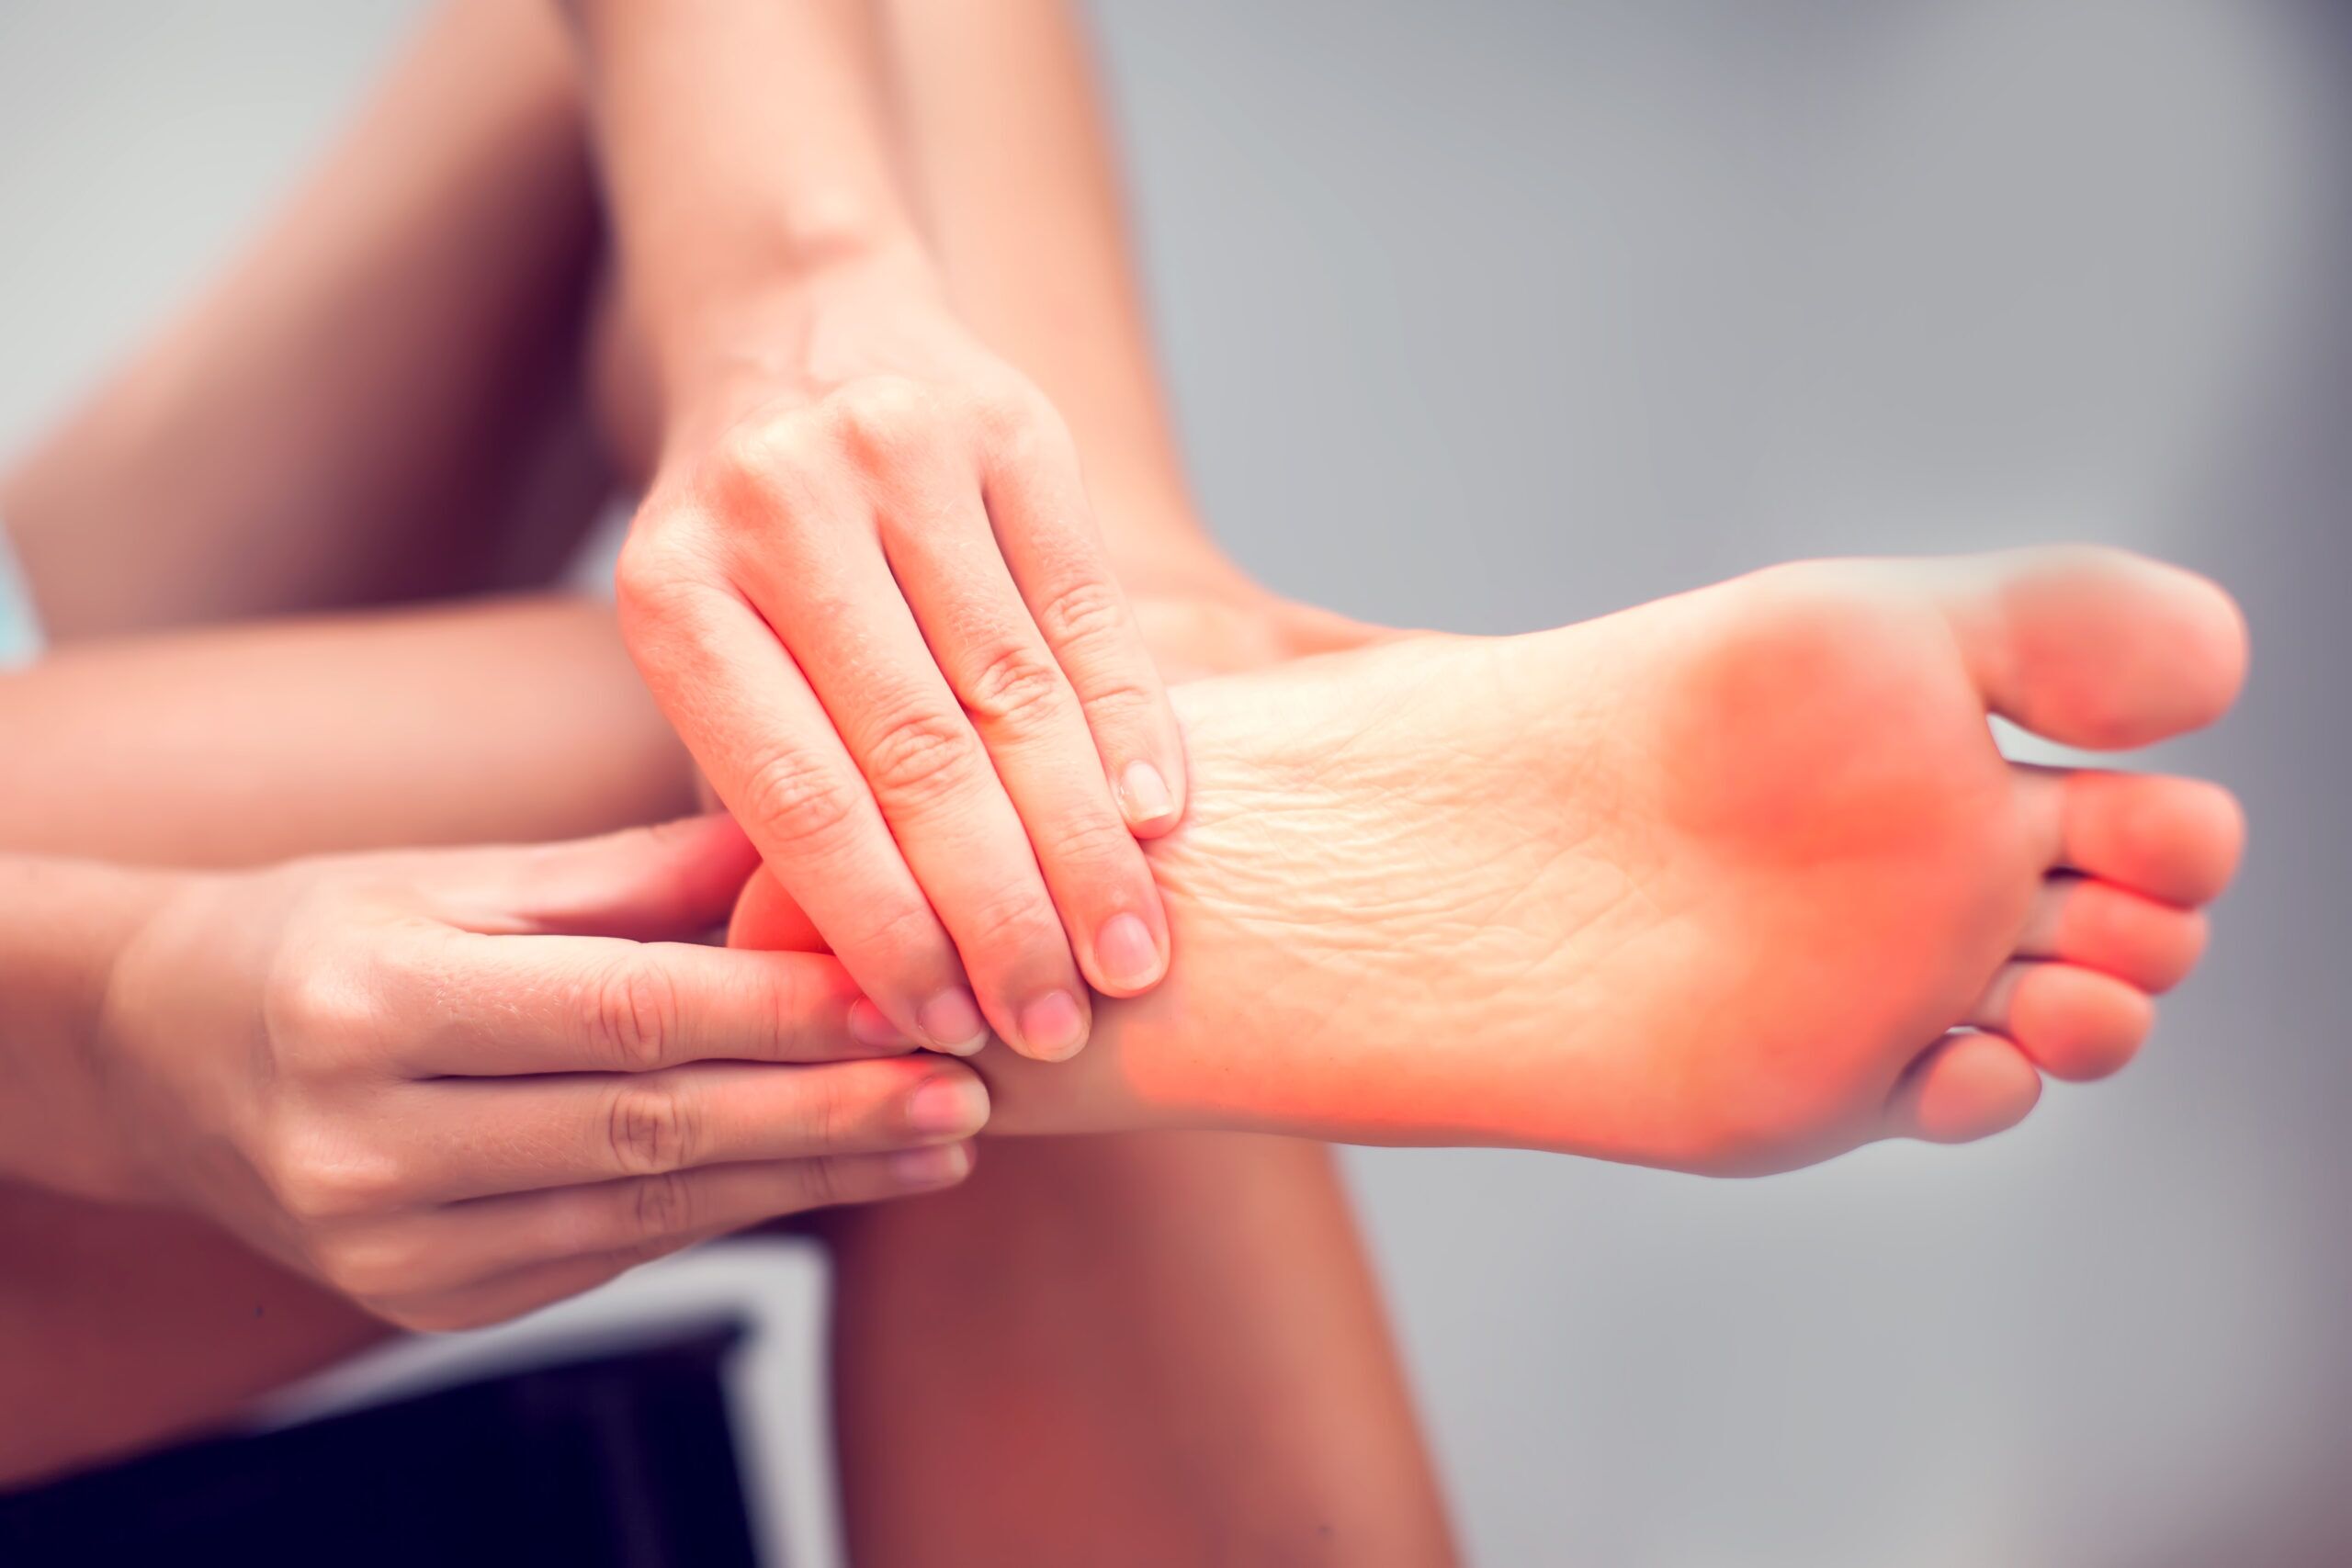 What is the Recovery Time for Heel Spur Surgery?